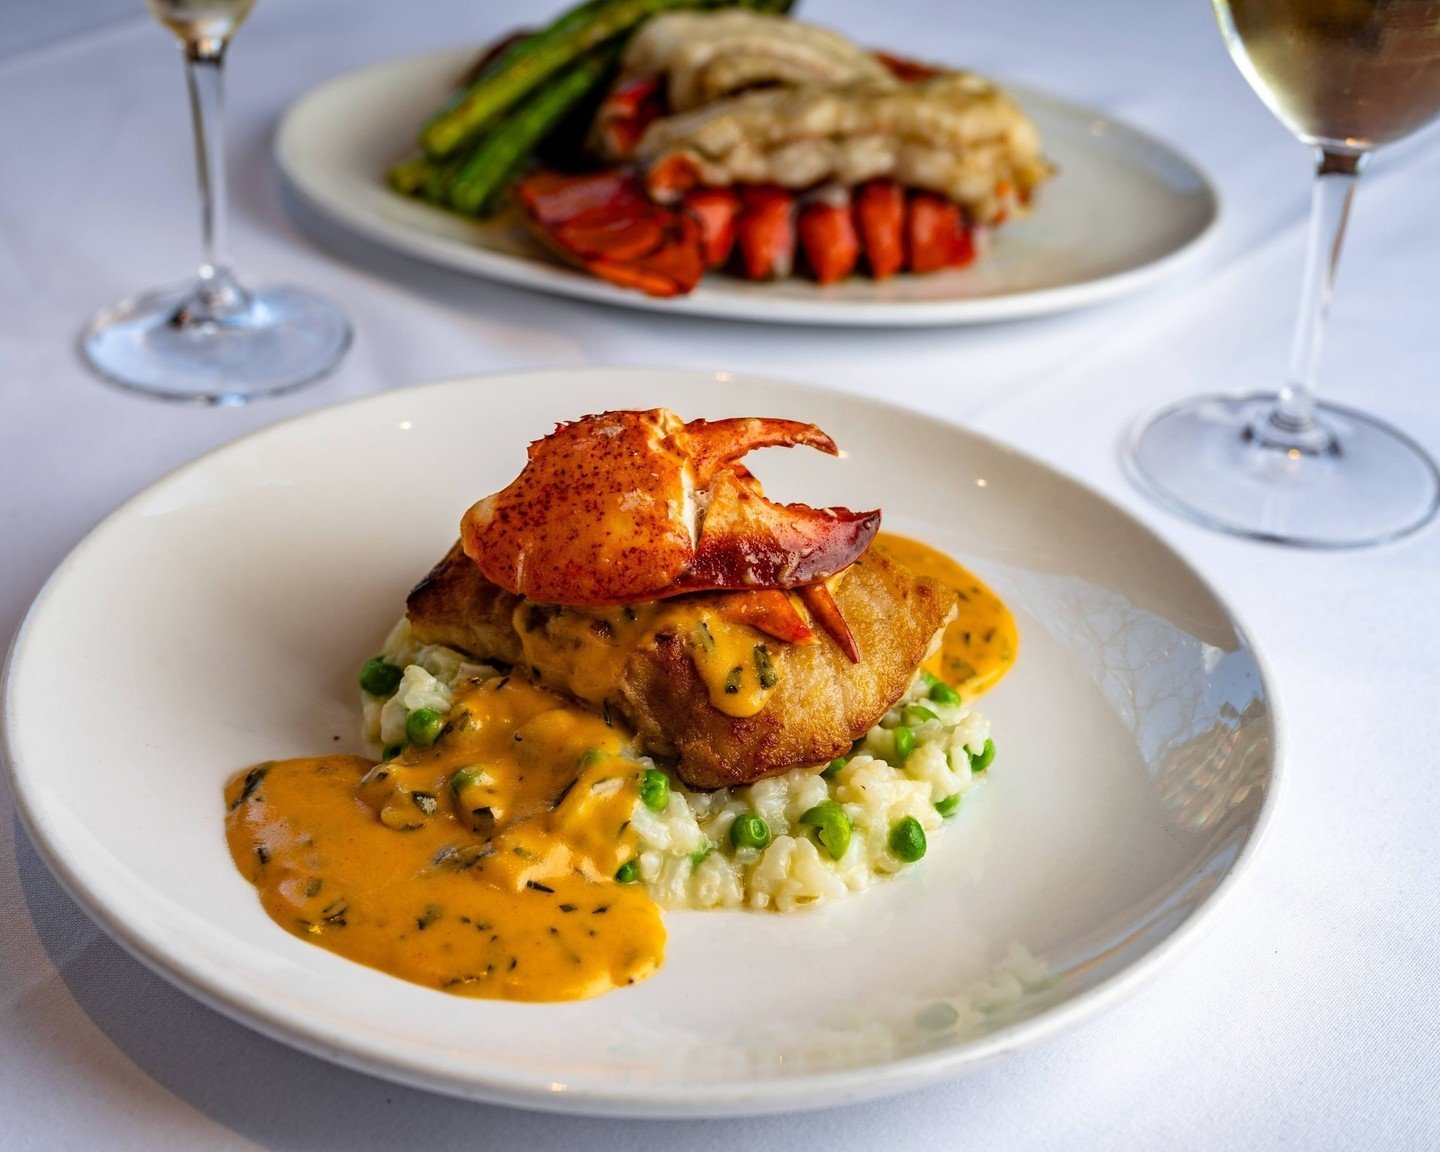 Treat Mom to Rosewood Grill this Mother's Day! 🥂 ⁠
⁠
Indulge in our Lobster Topped Alaskan Halibut with spring pea risotto topped with Maine lobster and sherry lobster cream.⁠
⁠
Or dive into our Twin Maine Lobster Tails with roasted potatoes, aspara